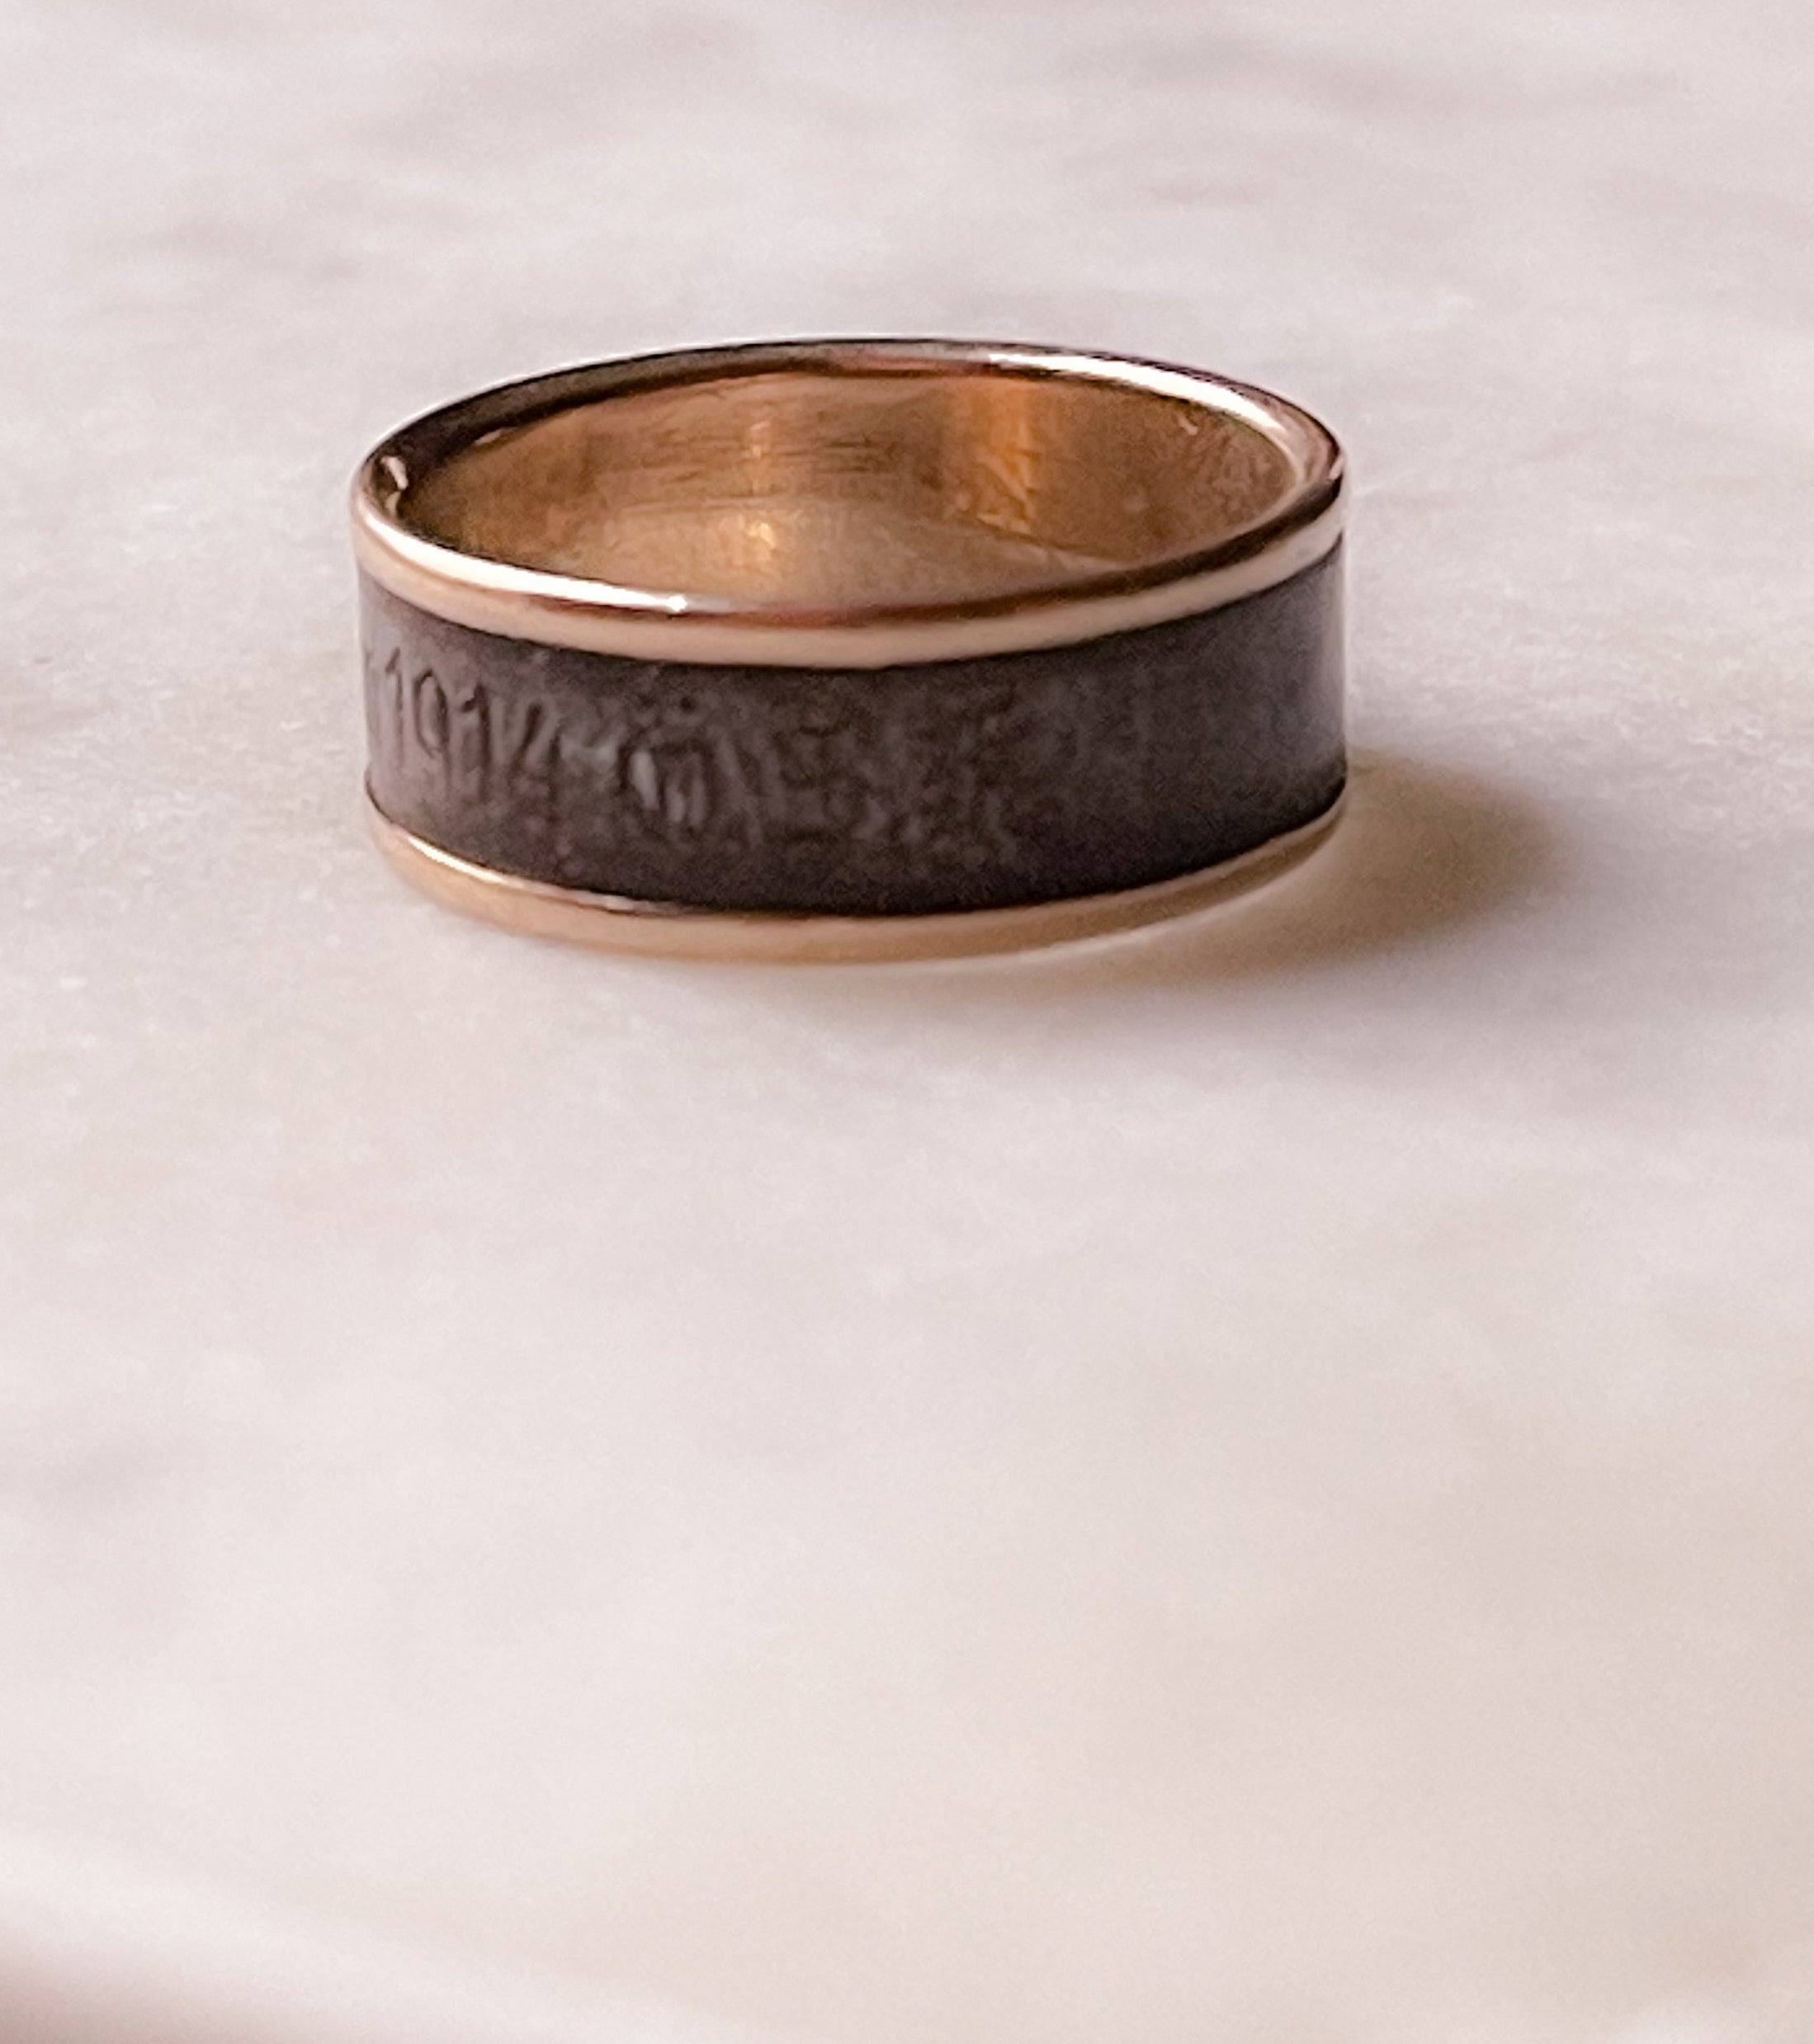 Iron & Gold Ring with German Inscription - "For Iron I Gave Gold" (INCLUDE ART NOUVEAU ROSE PEARL BROOCH)